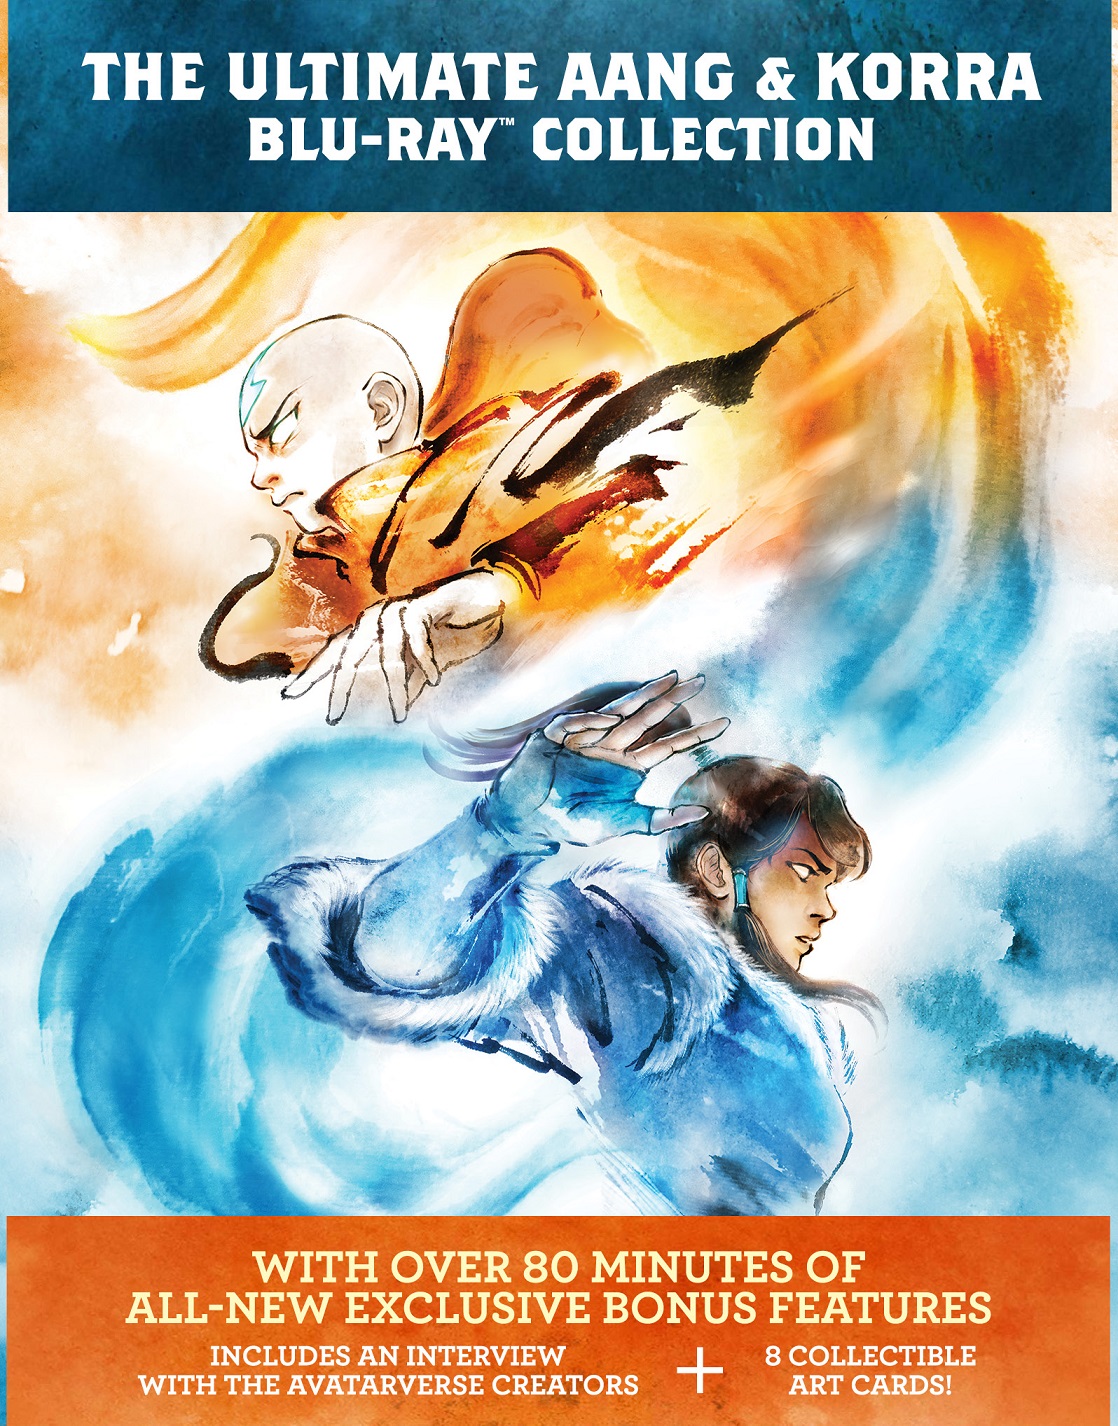 AVATAR THE LAST AIRBENDER  THE LEGEND OF KORRA The Complete Collection  Bluray Review  HiDef Ninja  Bluray SteelBooks  Pop Culture  Movie  News AVATAR THE LAST AIRBENDER  THE